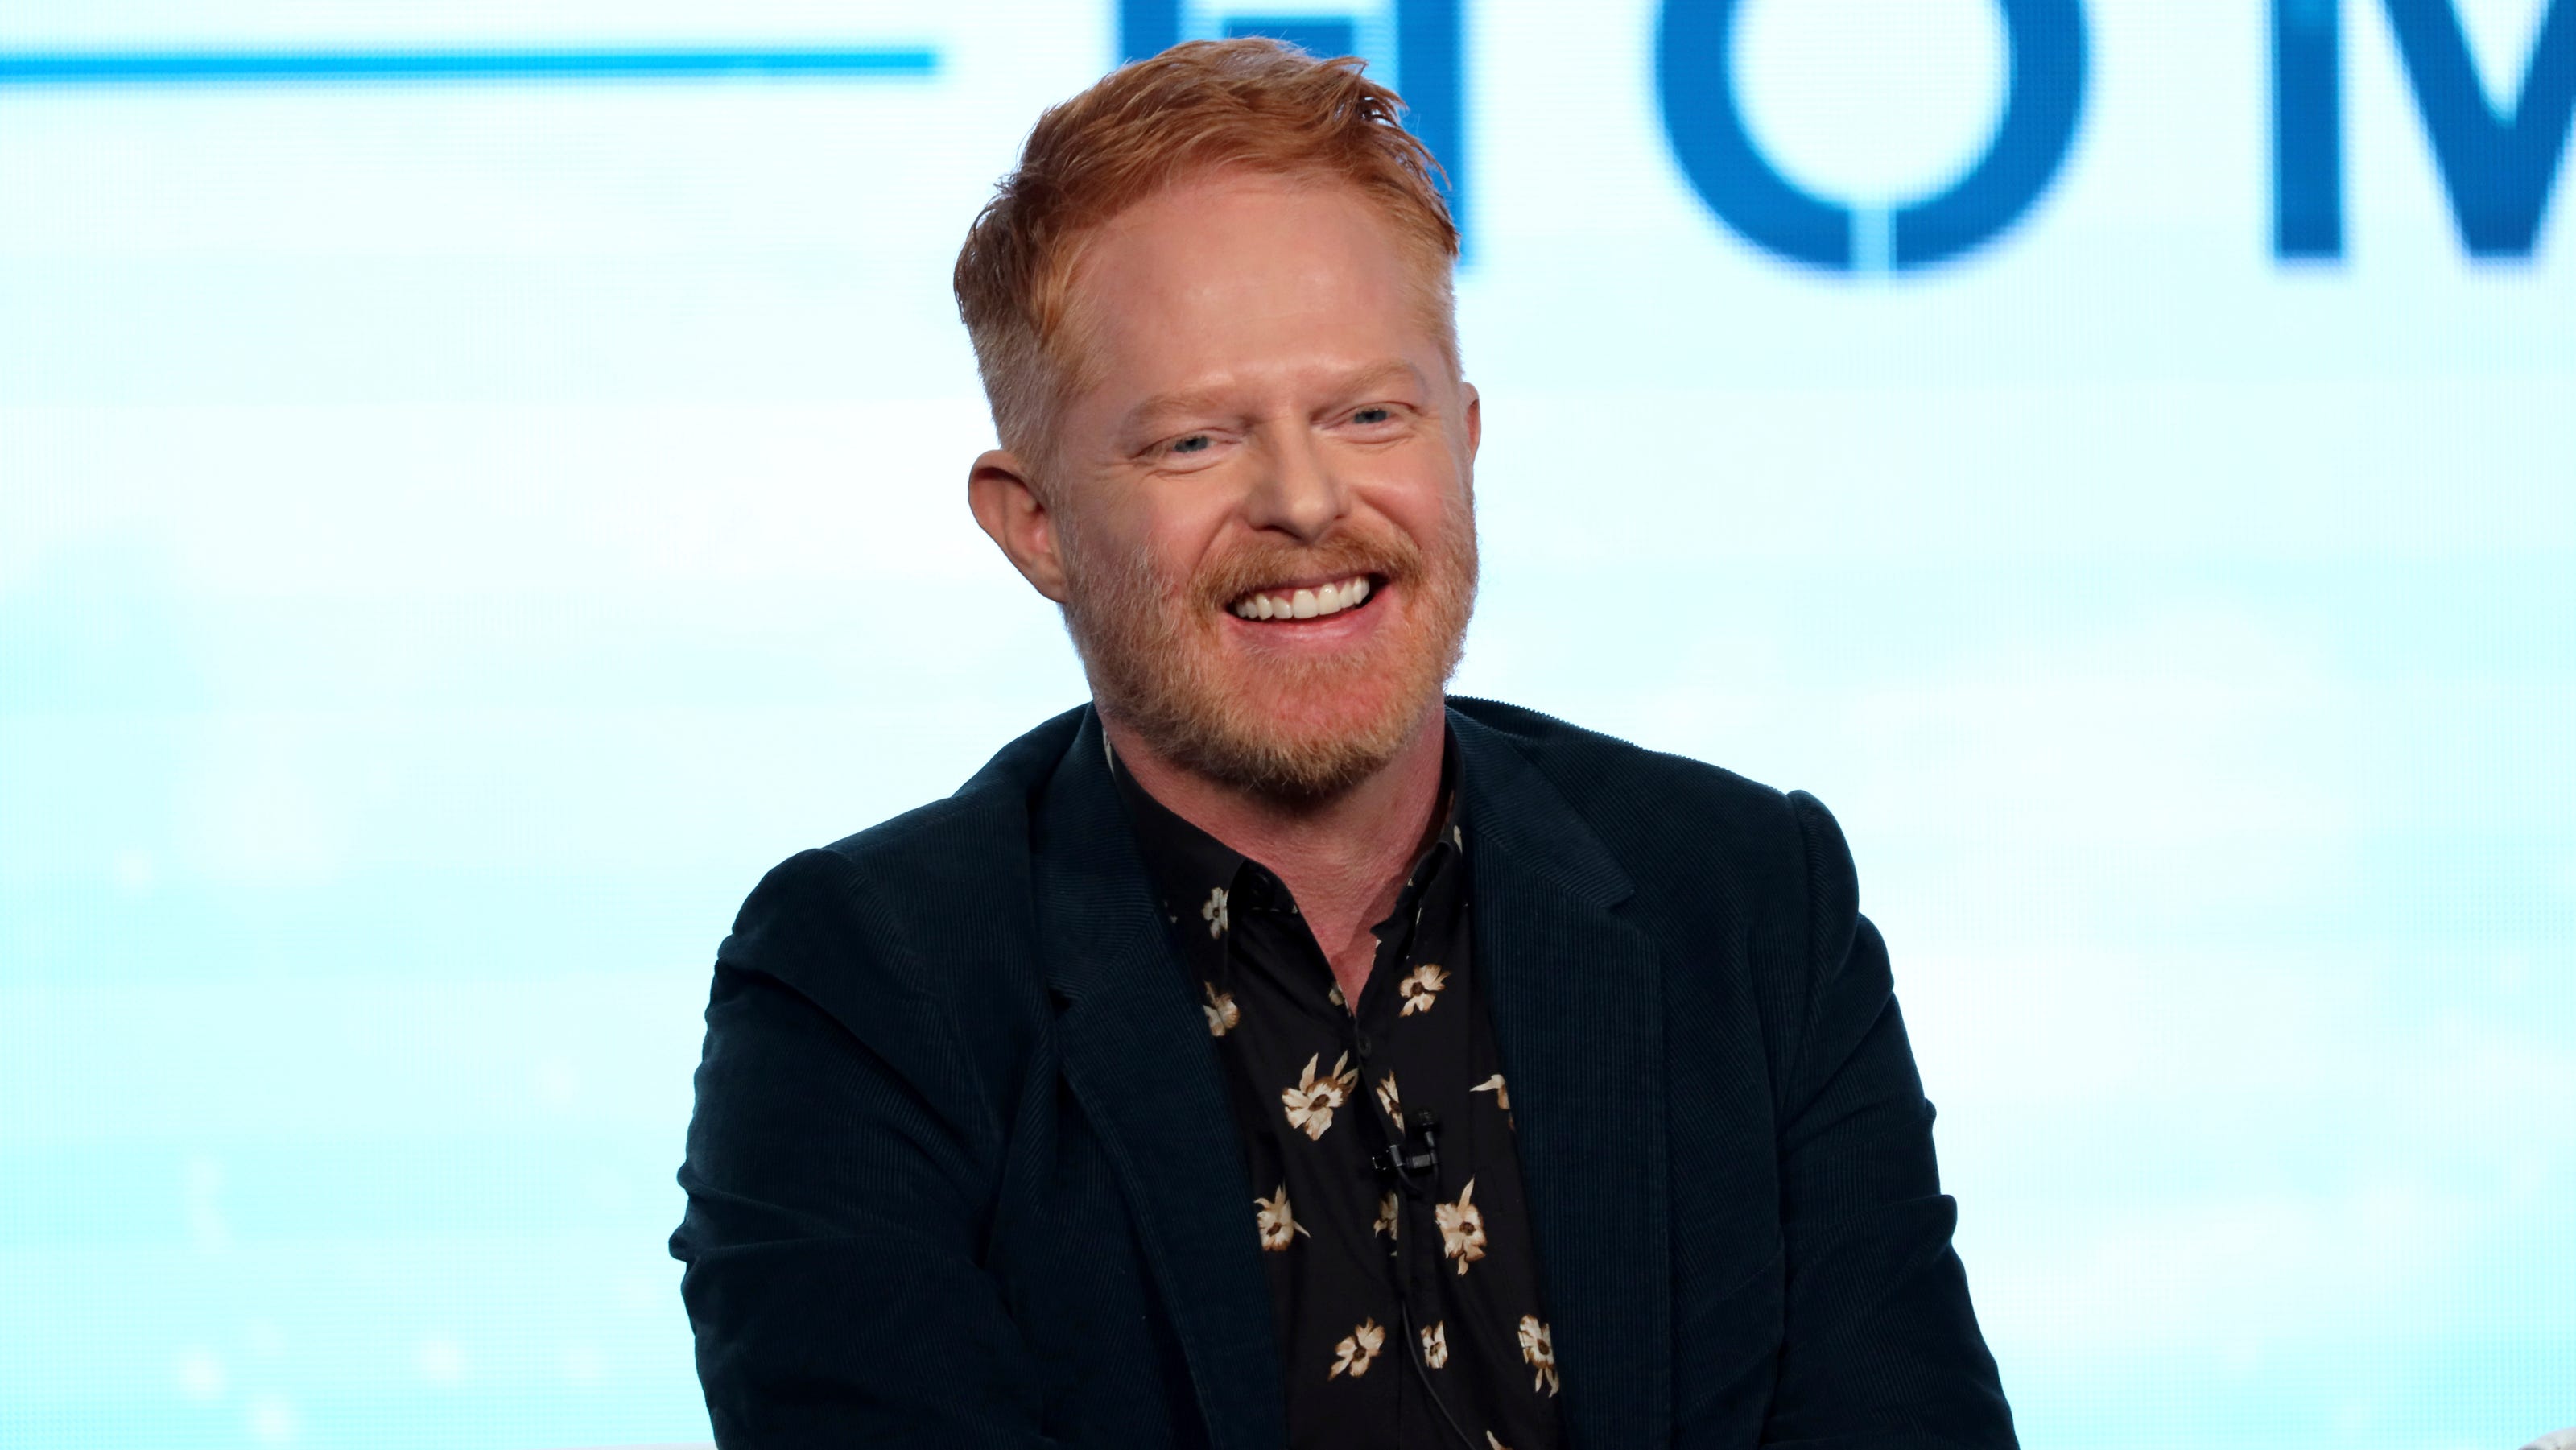 Jesse Tyler Ferguson got a 'bit of skin cancer' removed: What you should know about SPF - USA TODAY